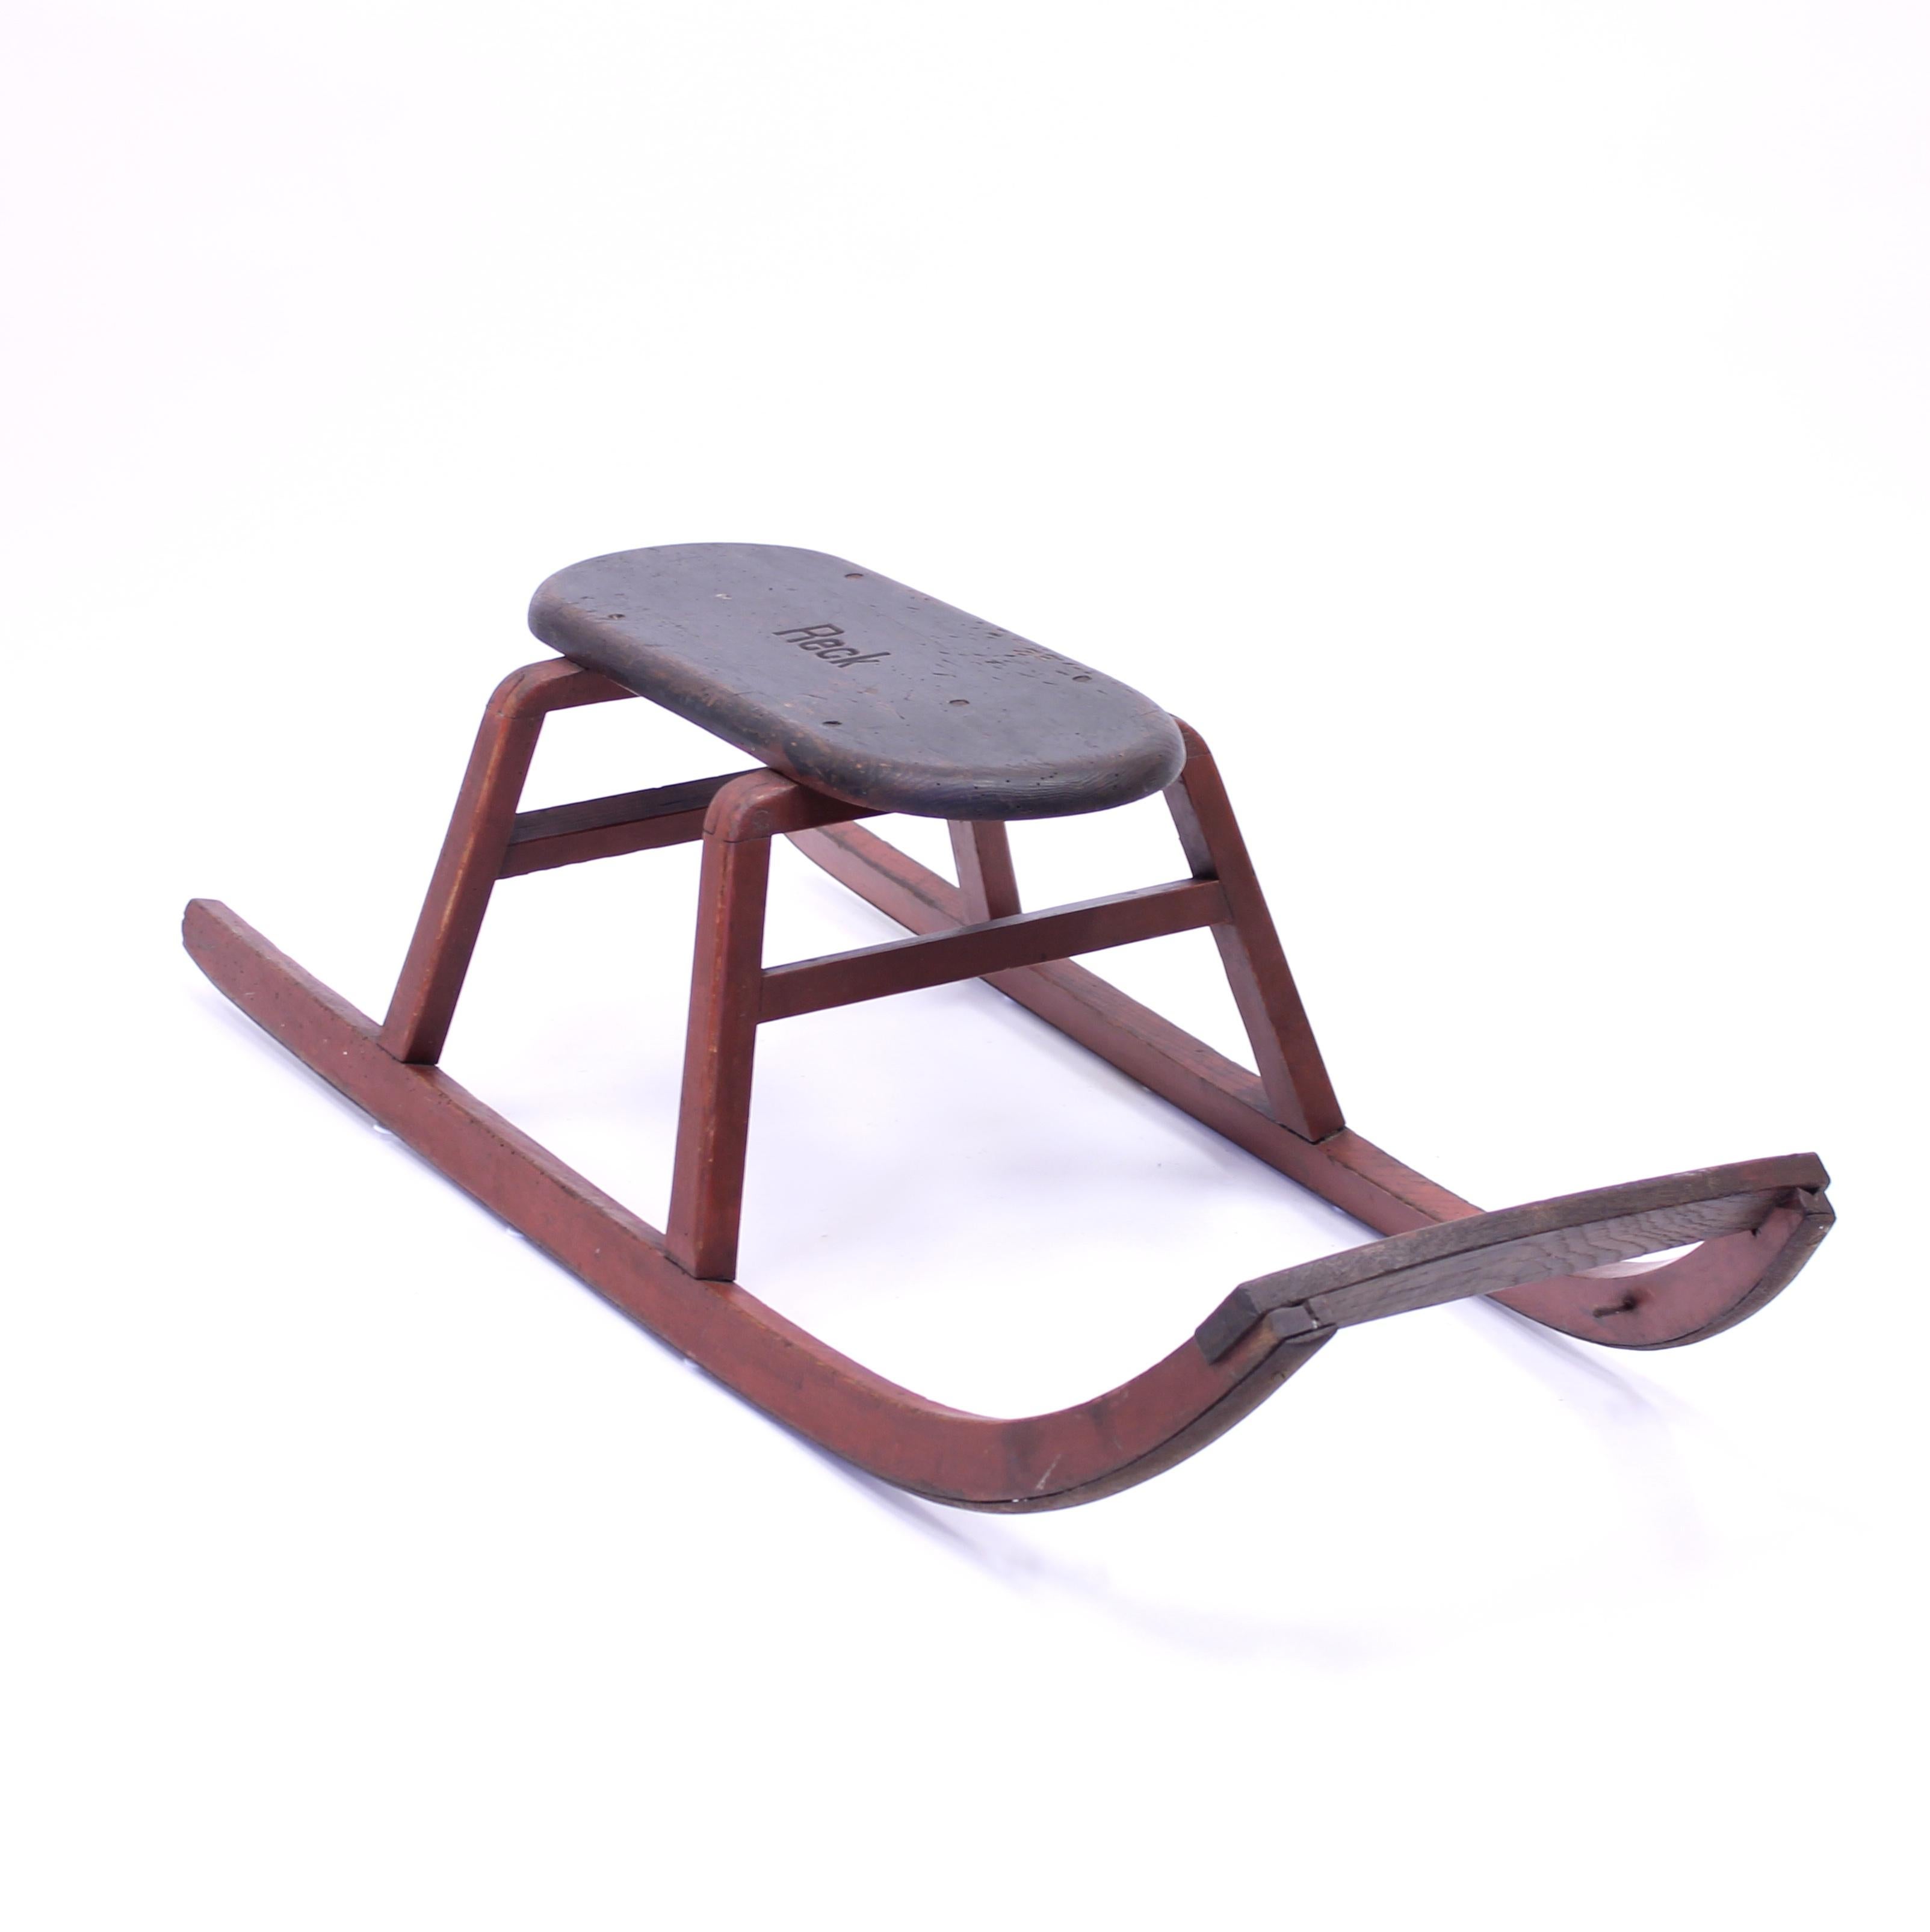 vintage wooden sleds with metal runners